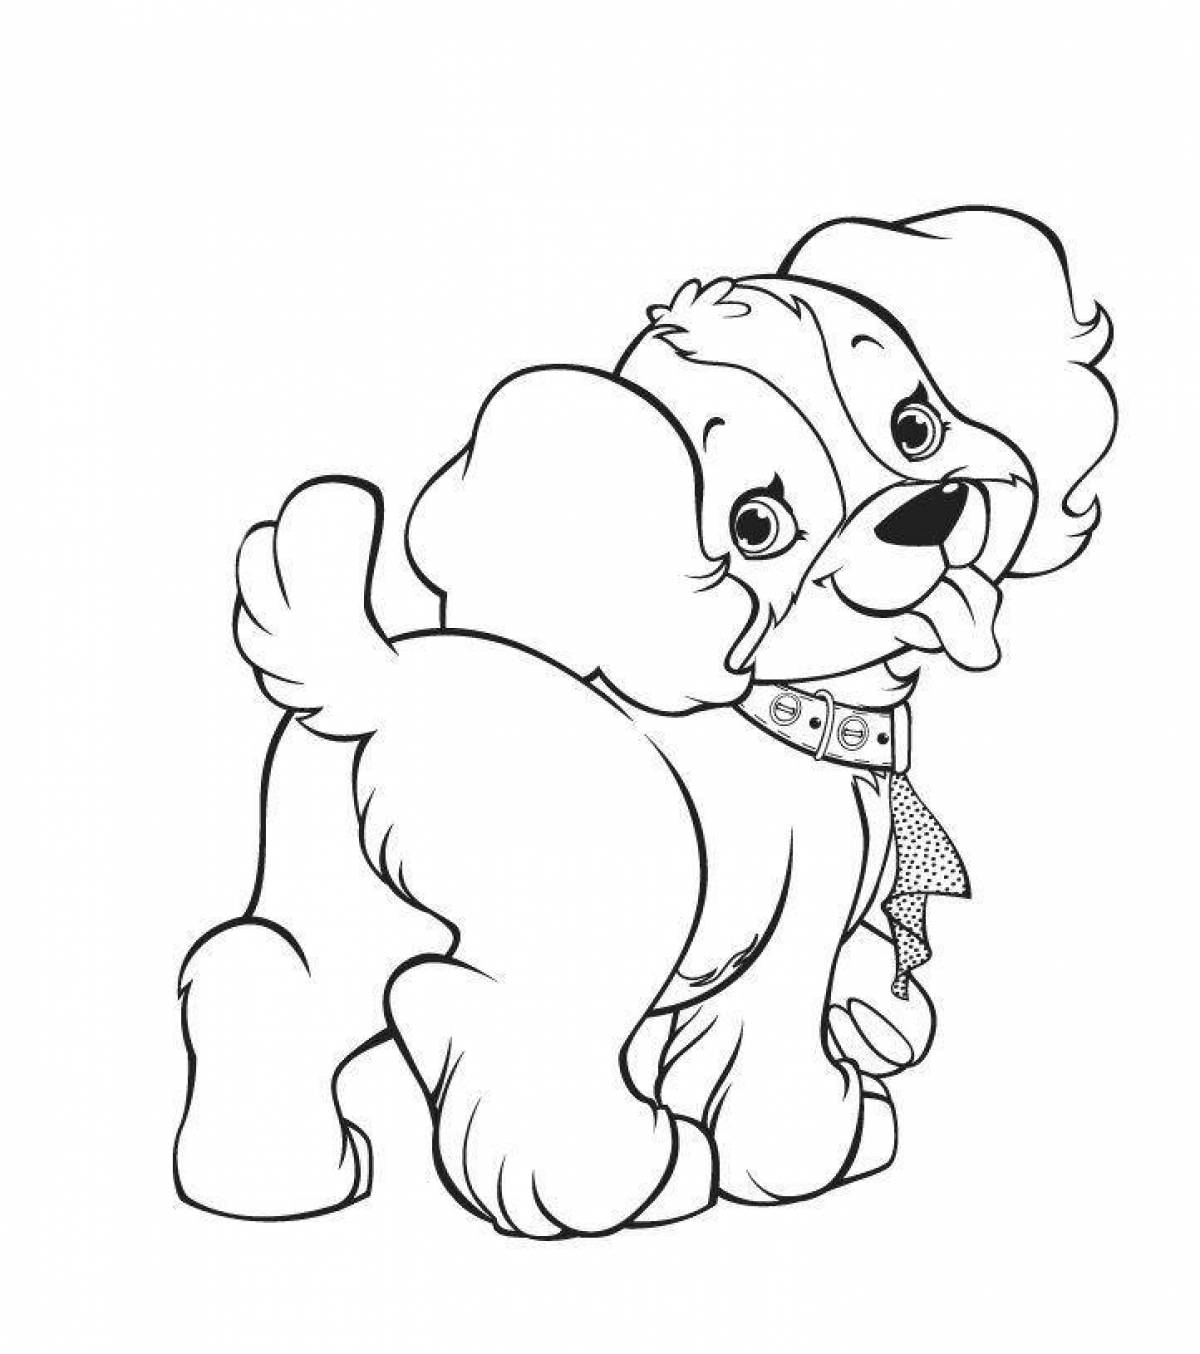 Wiggly coloring page dog picture for kids